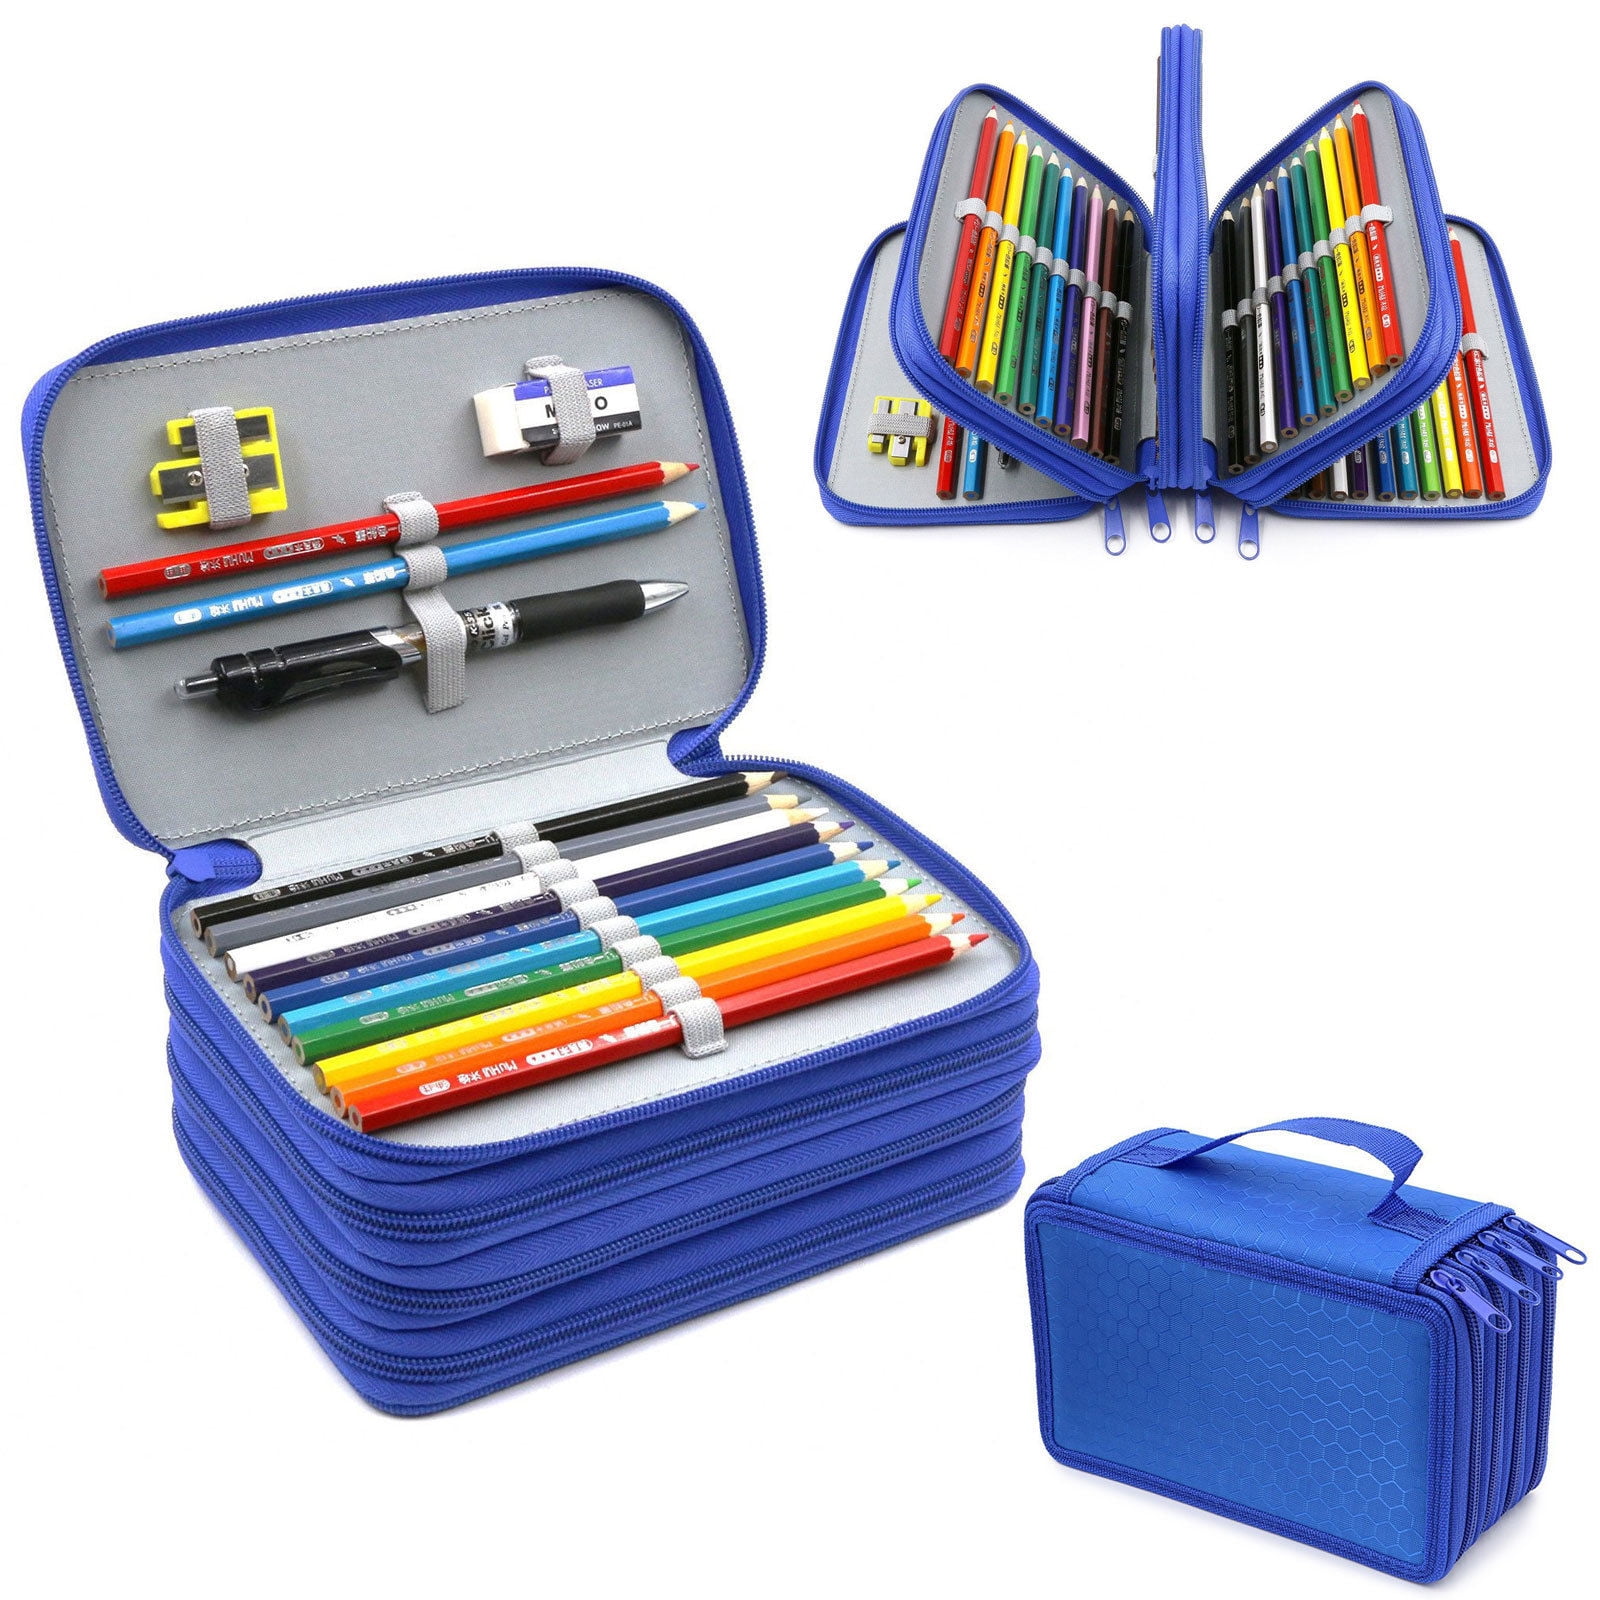 Black Pencil Case Useful Processed Pen Box 72 Slots Foldable Portable Fabric Office for Students School Artists